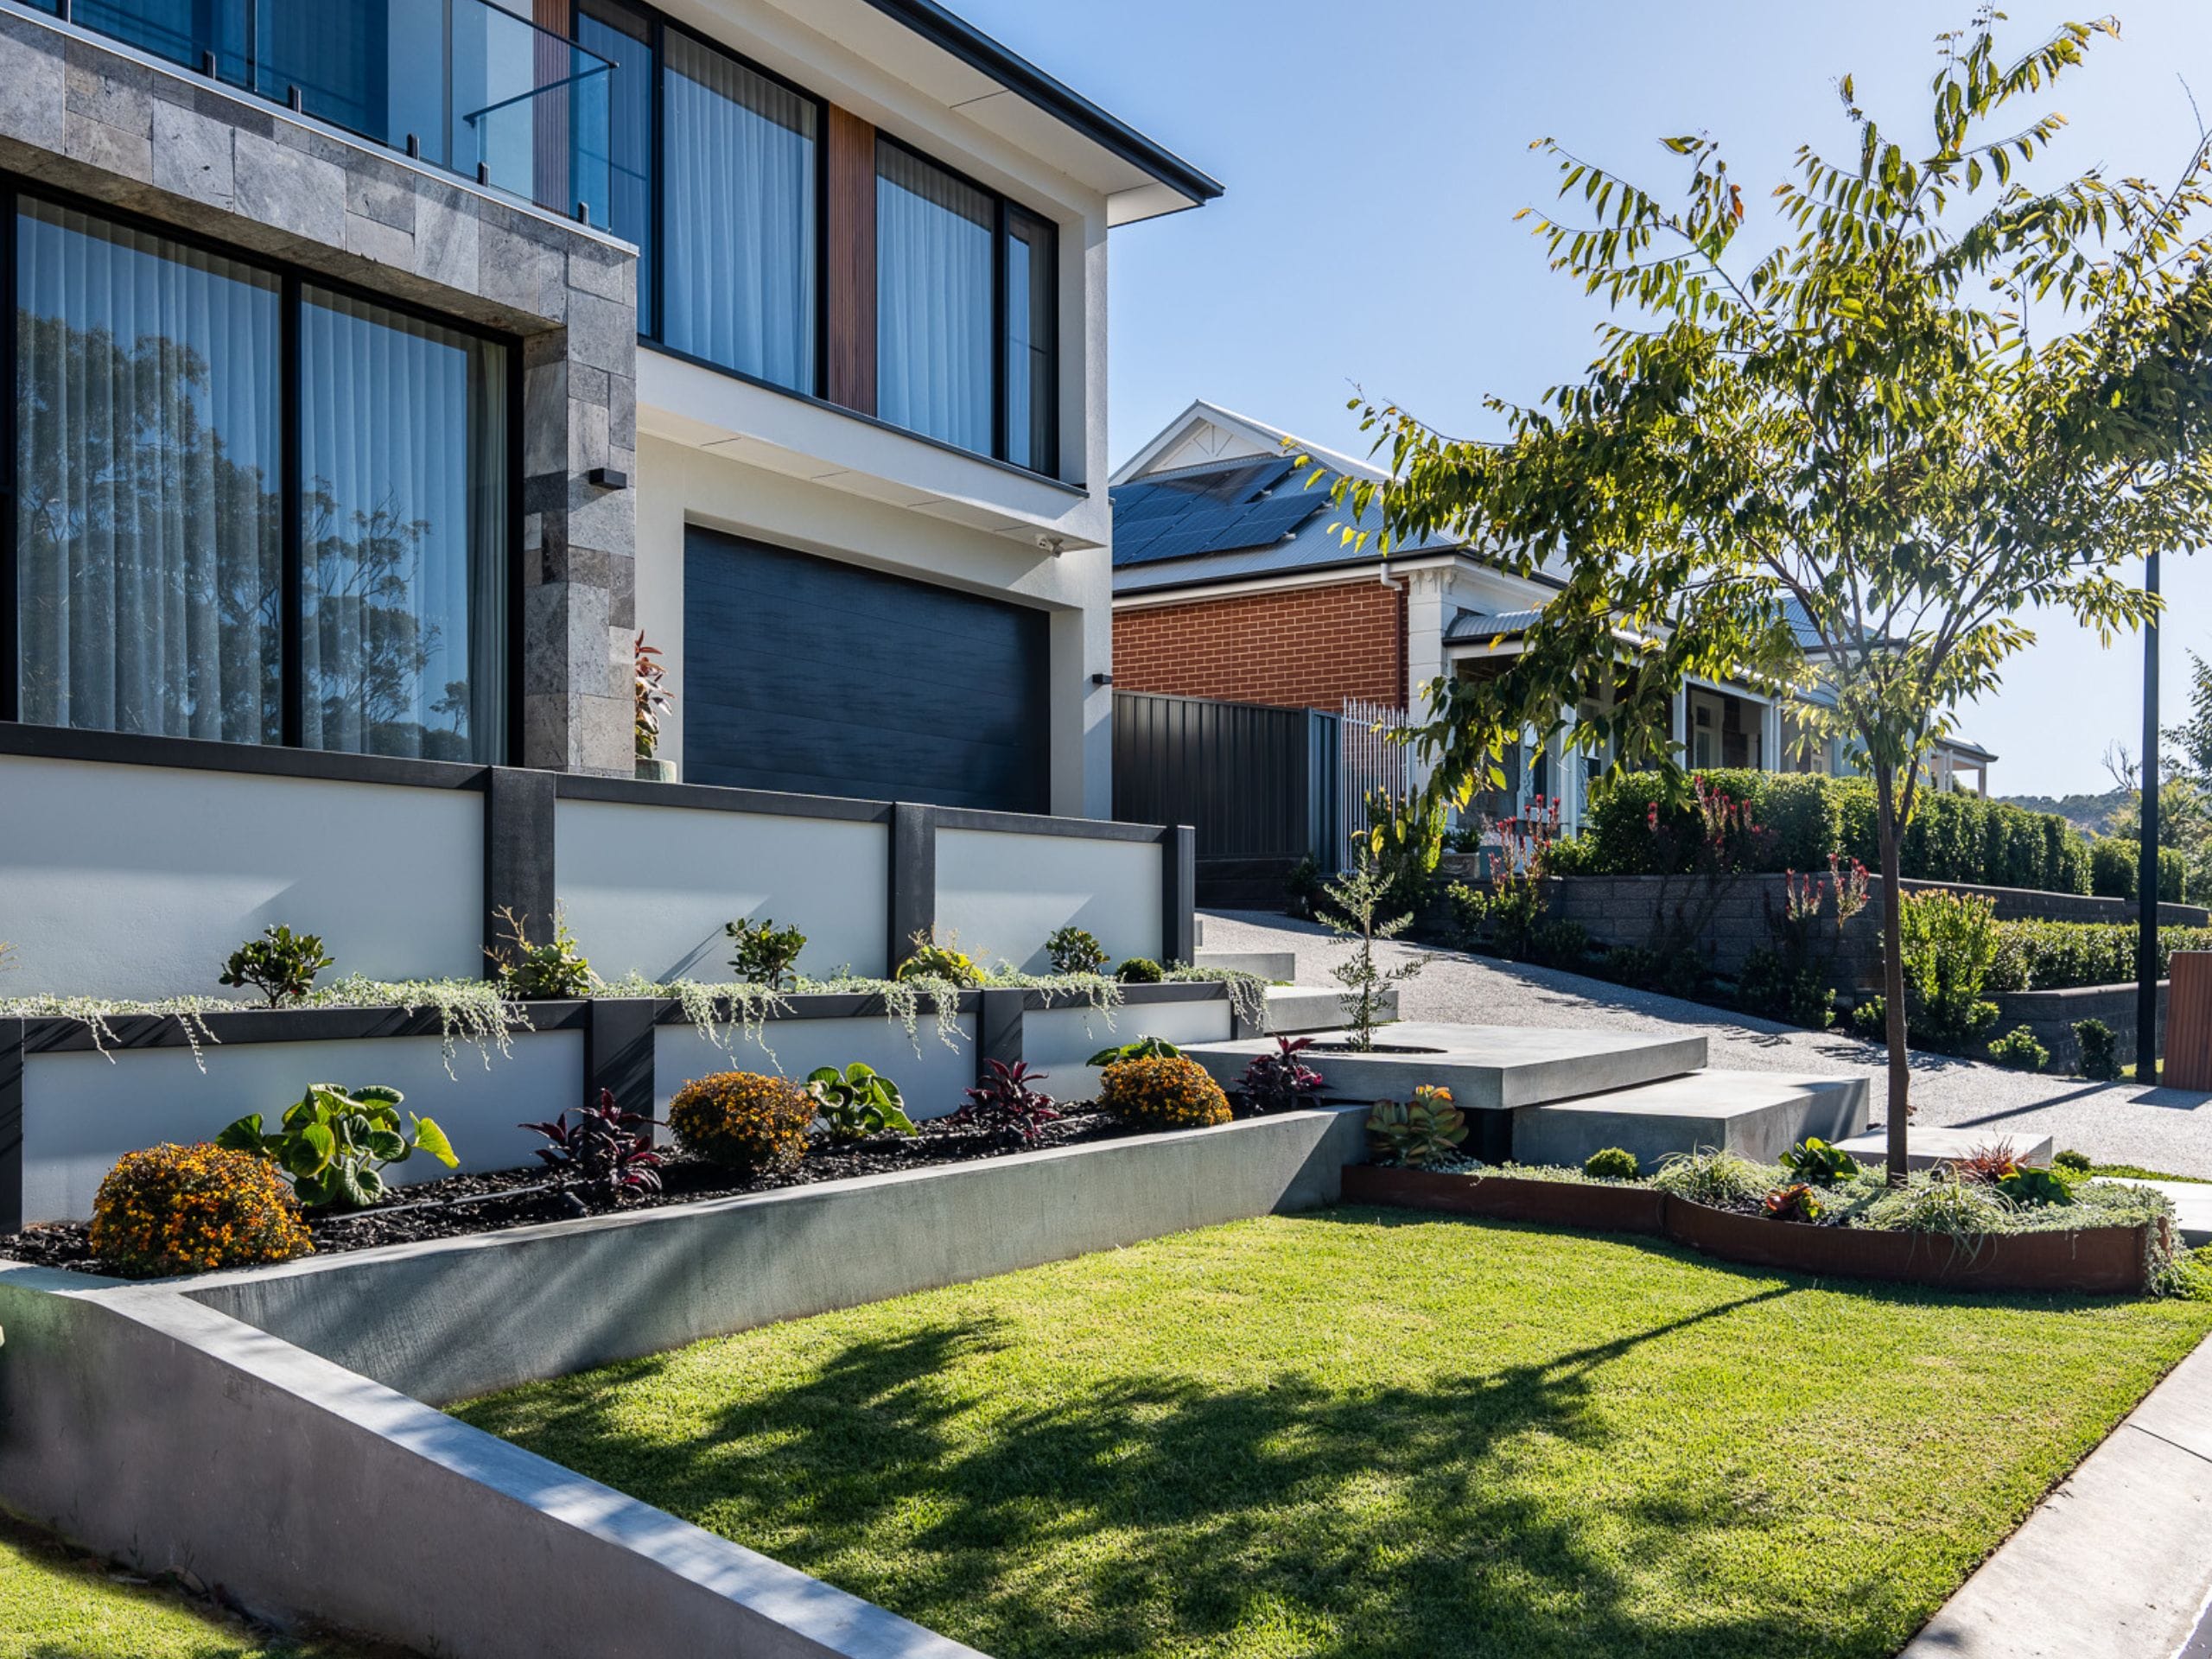 An integrated retaining wall solution is ideal for a sloping block